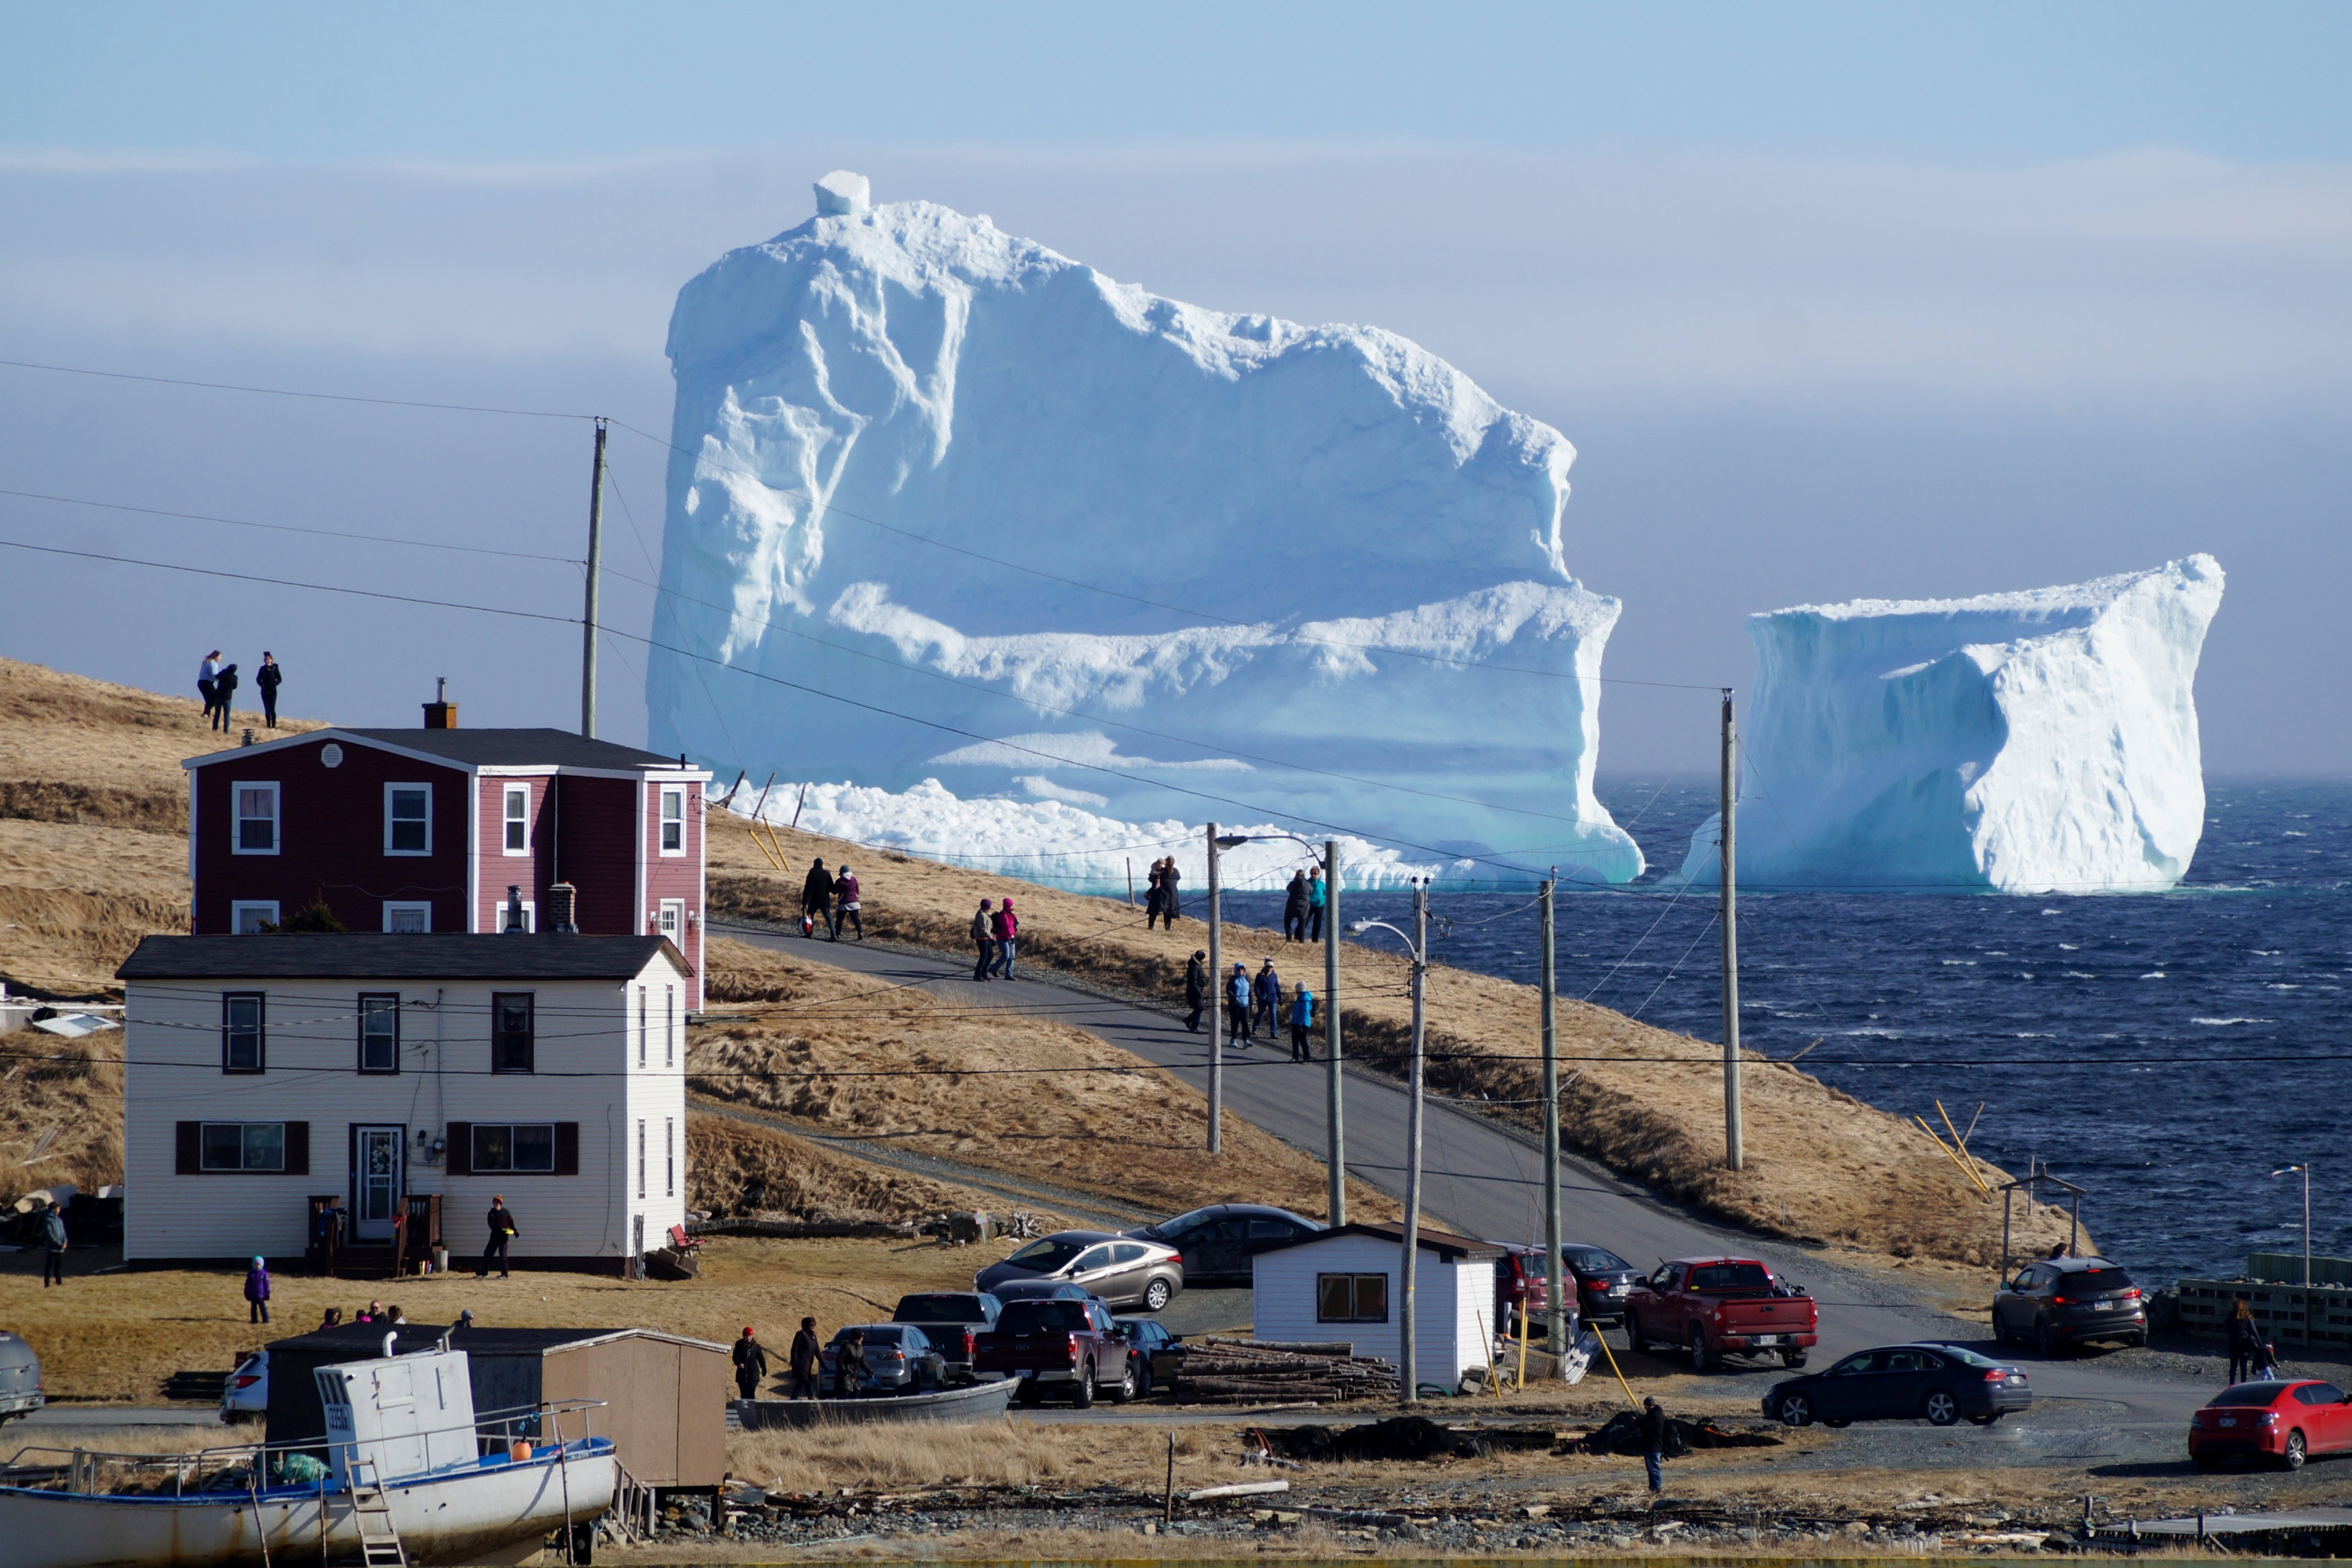 Residents view the first iceberg of the season as it passes the South Shore, also known as "Iceberg Alley", near Ferryland Newfoundland, Canada April 16, 2017. Picture taken April 16, 2017. (Jody Martin / Reuters file photo)